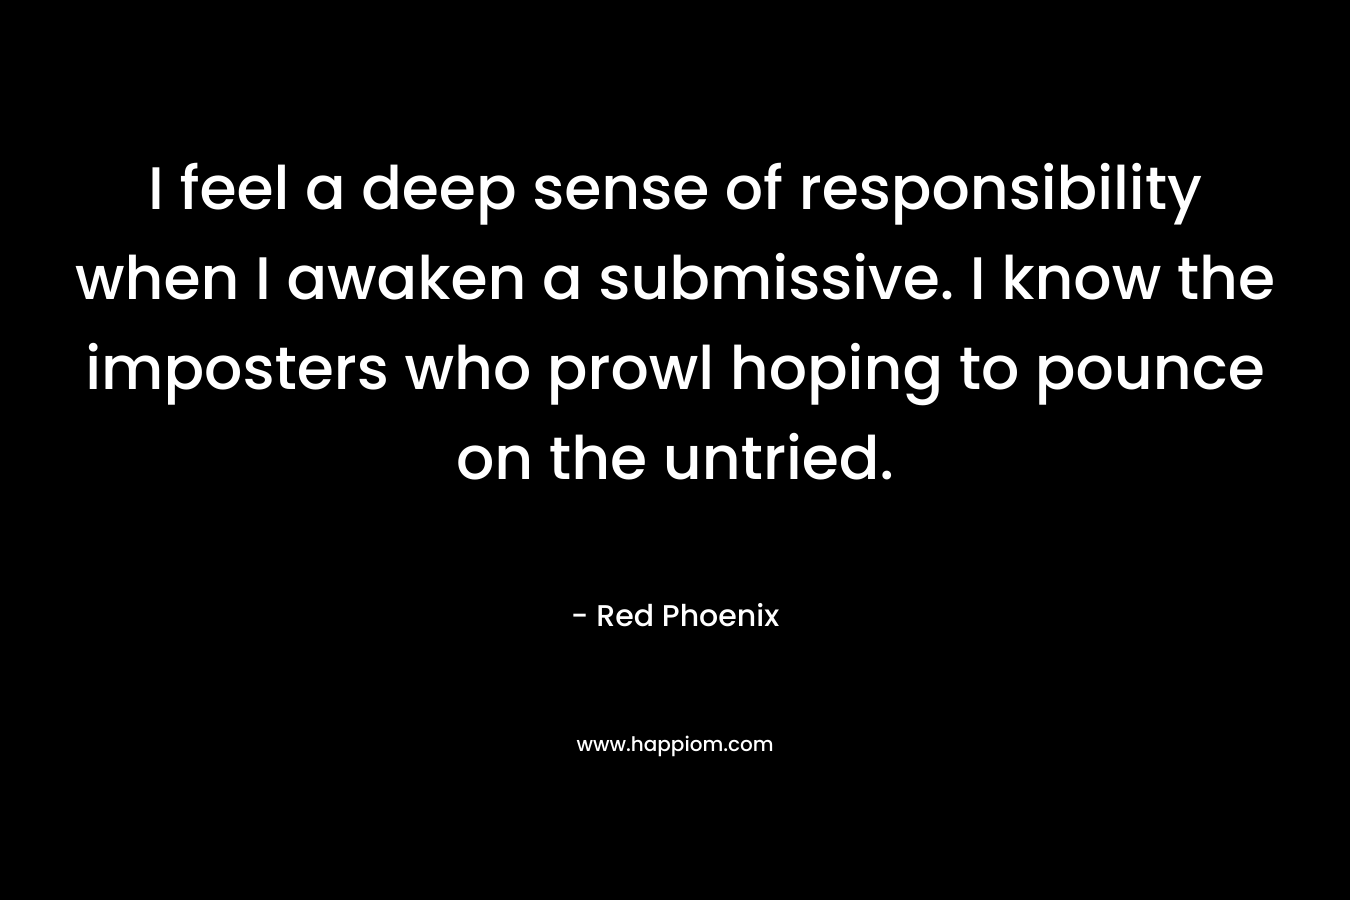 I feel a deep sense of responsibility when I awaken a submissive. I know the imposters who prowl hoping to pounce on the untried. – Red Phoenix